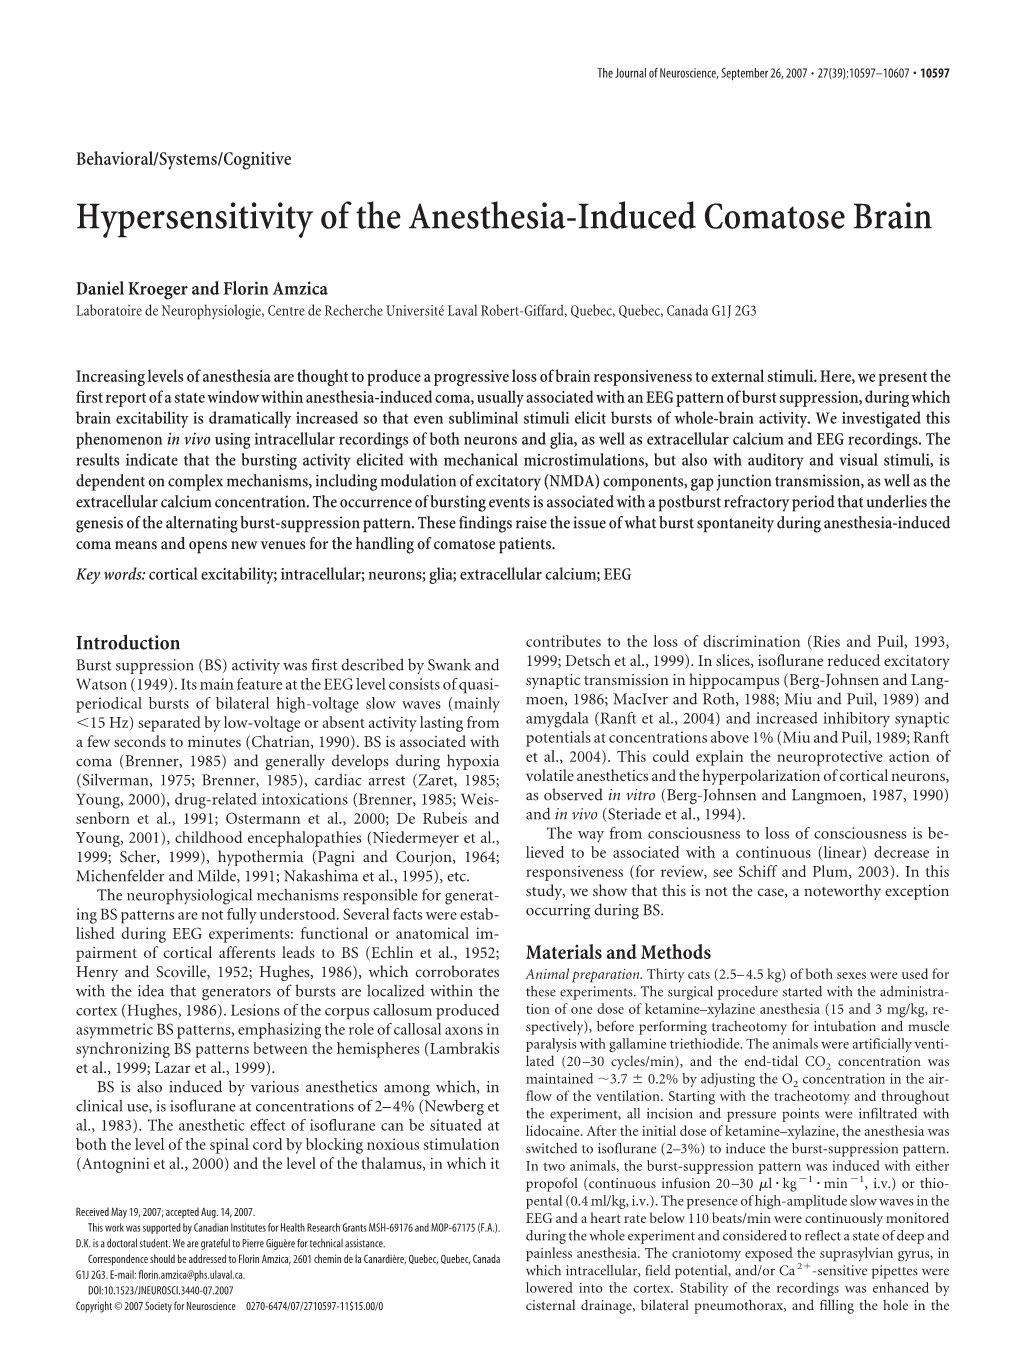 Hypersensitivity of the Anesthesia-Induced Comatose Brain